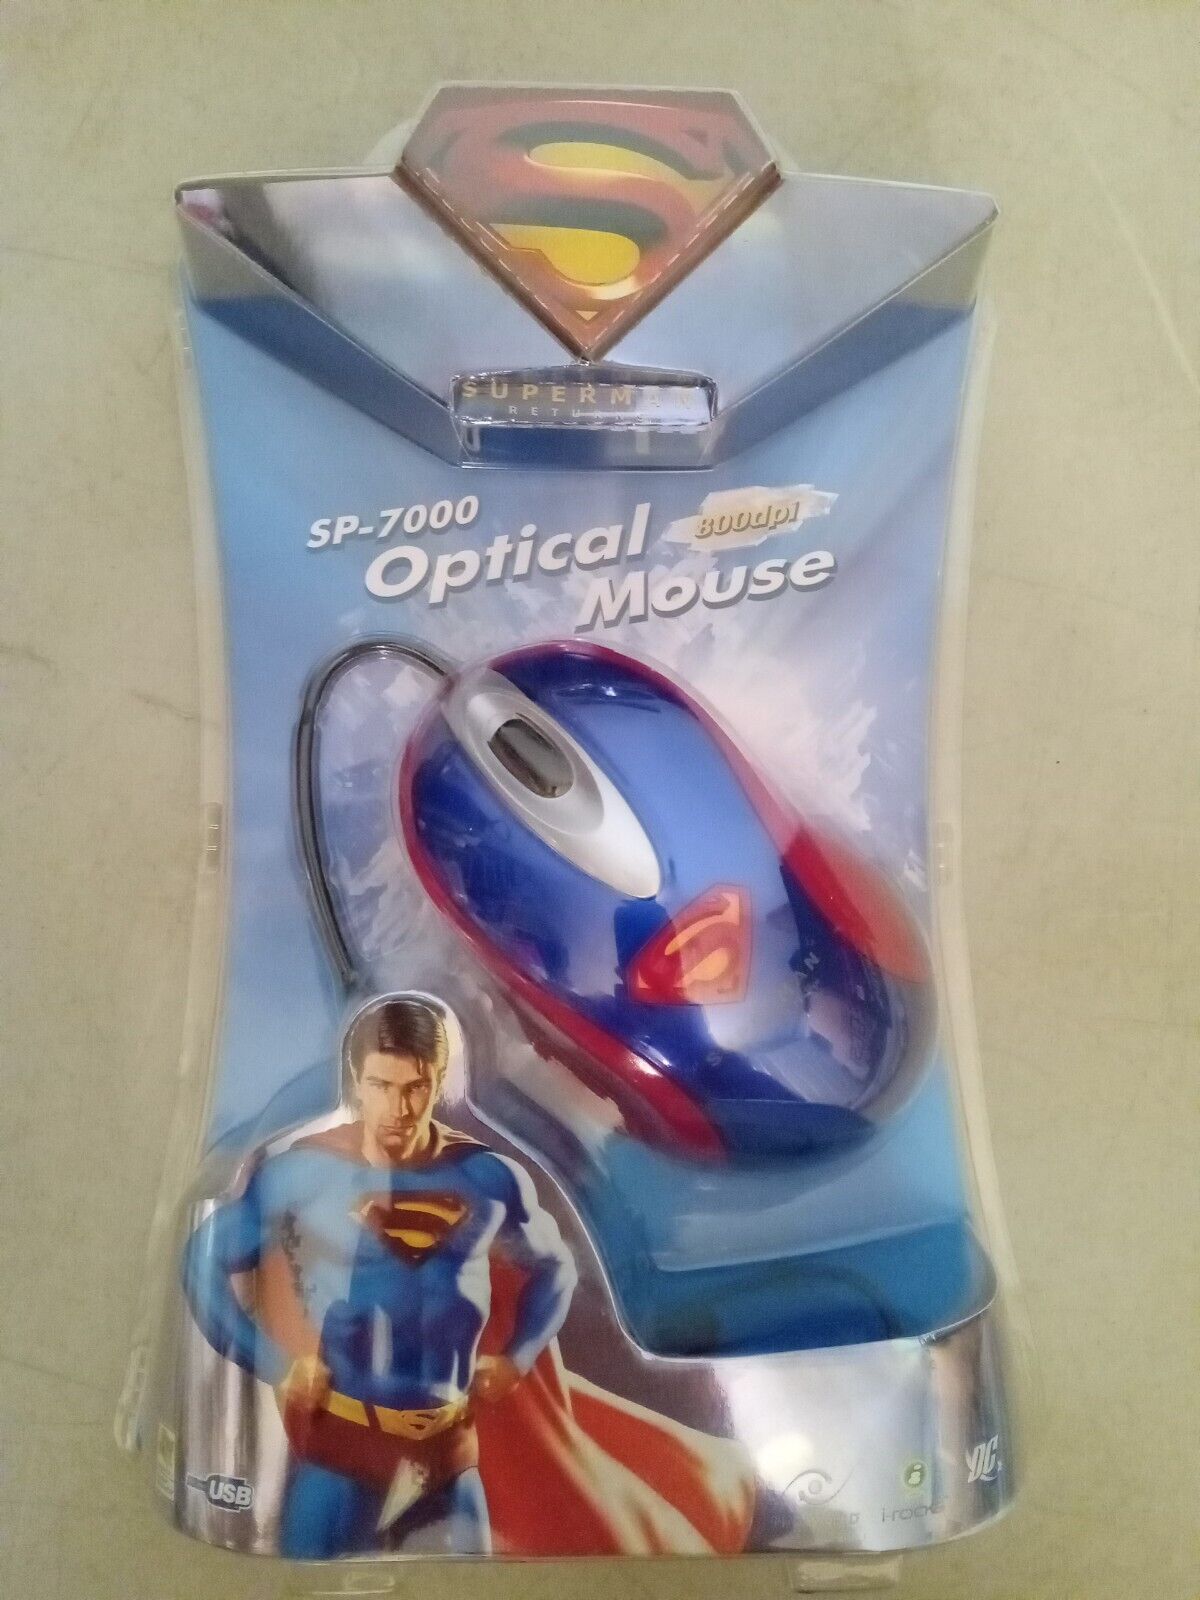 NEW SP-7000 DC Superman Returns Optical Wired Mouse 800dpi (rare) 